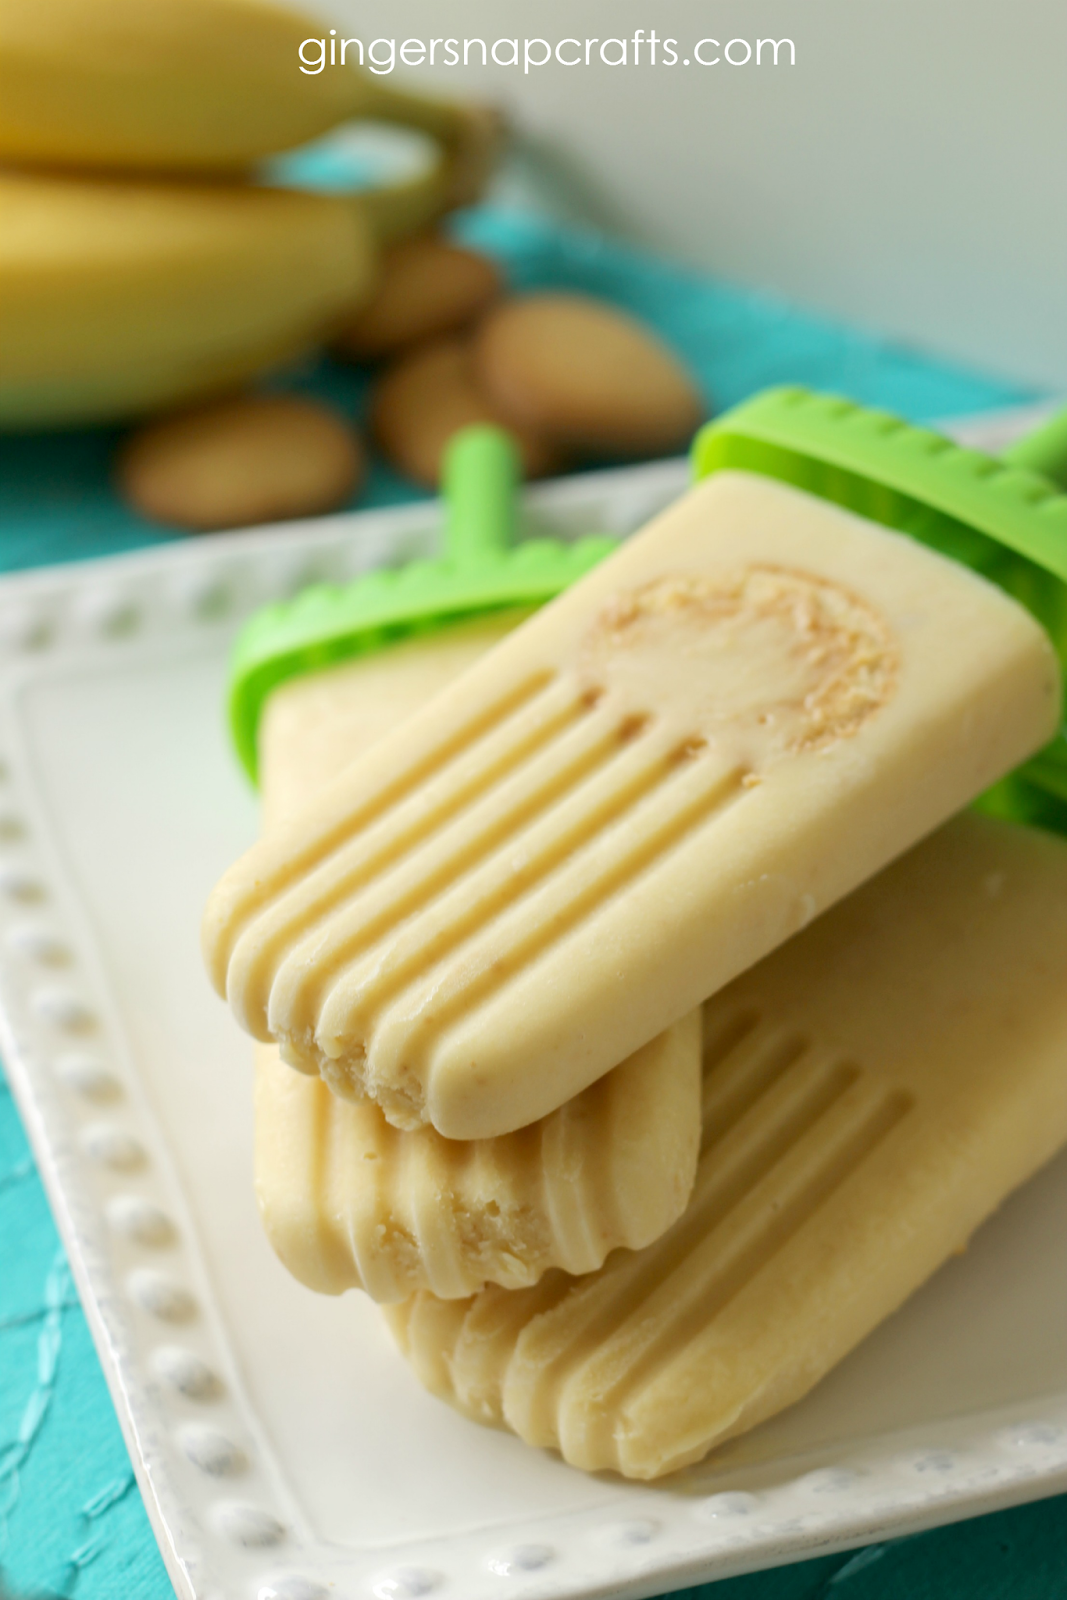 Banana Pudding Ice Pop Recipe from Nap Time CreationsBanana Pudding Ice Pop Recipe from Nap Time Creations